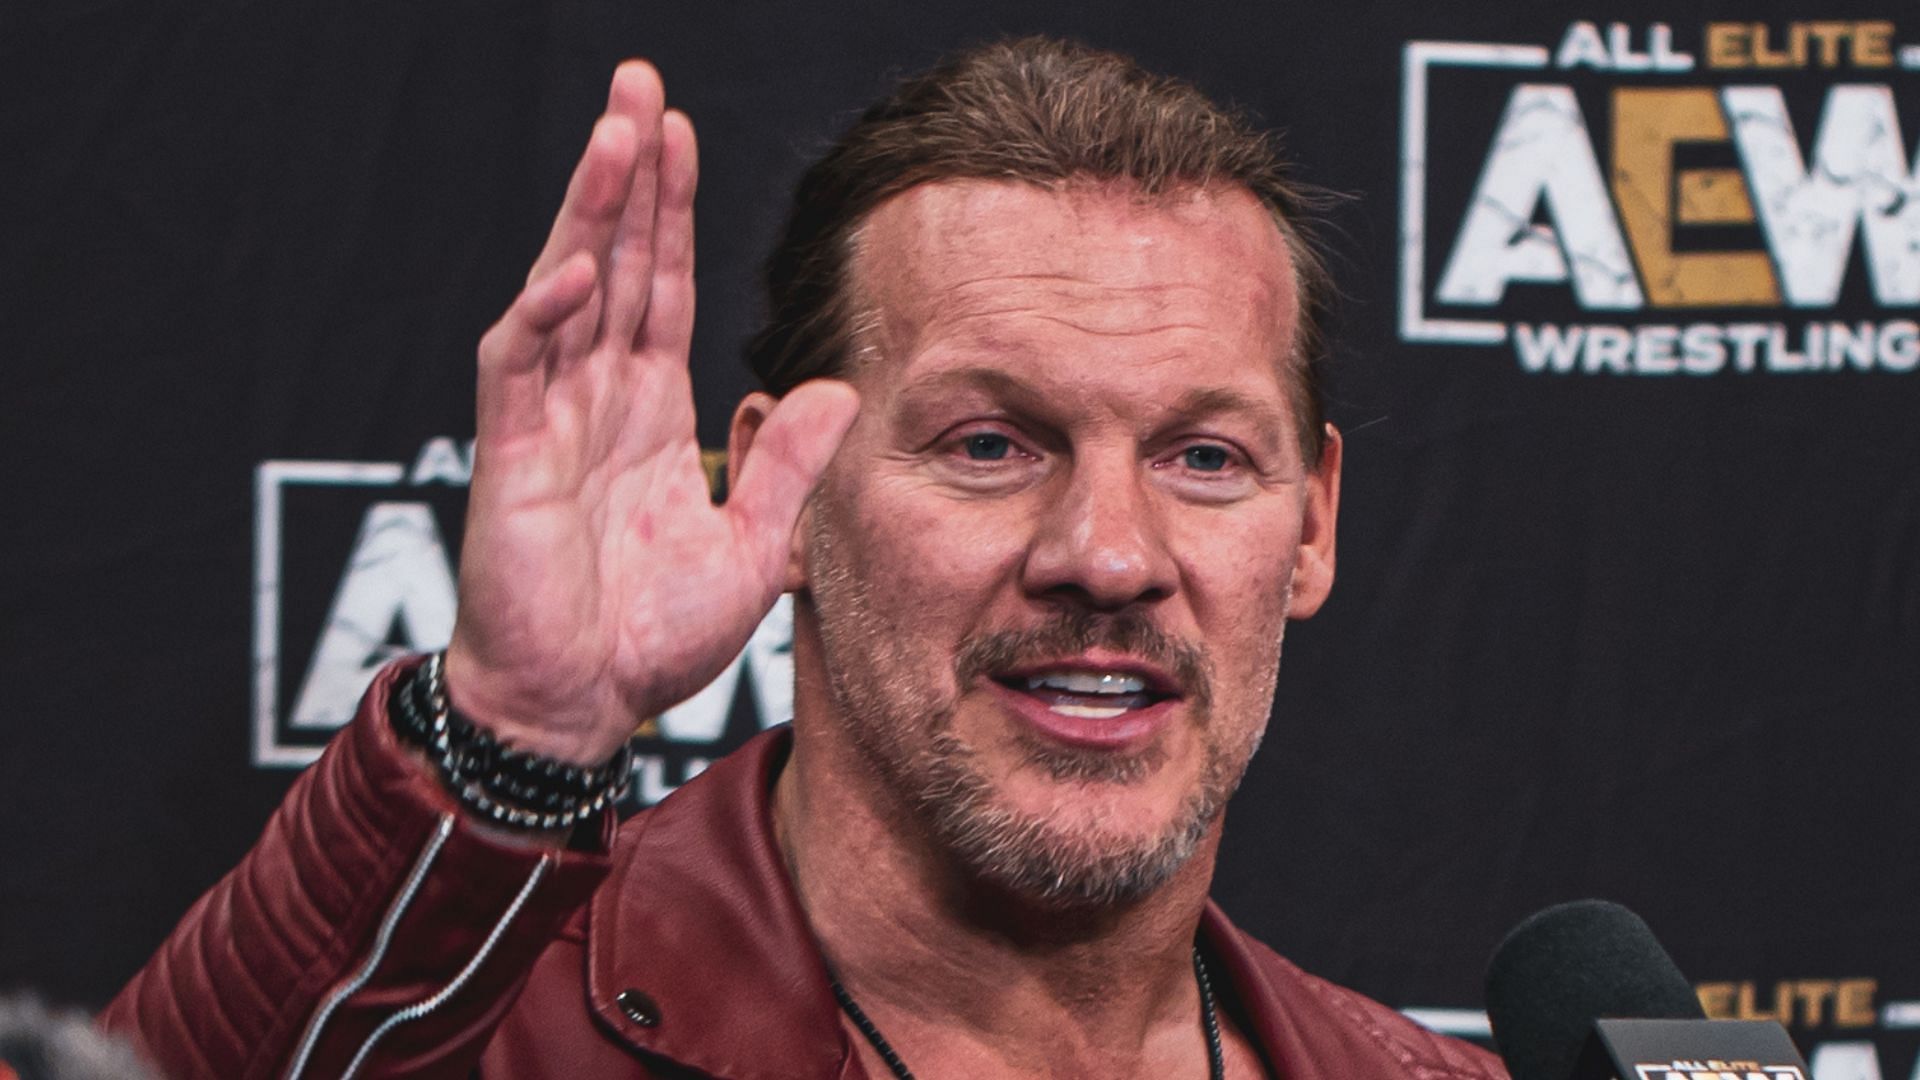 What advice has Chris Jericho been giving to an AEW star?